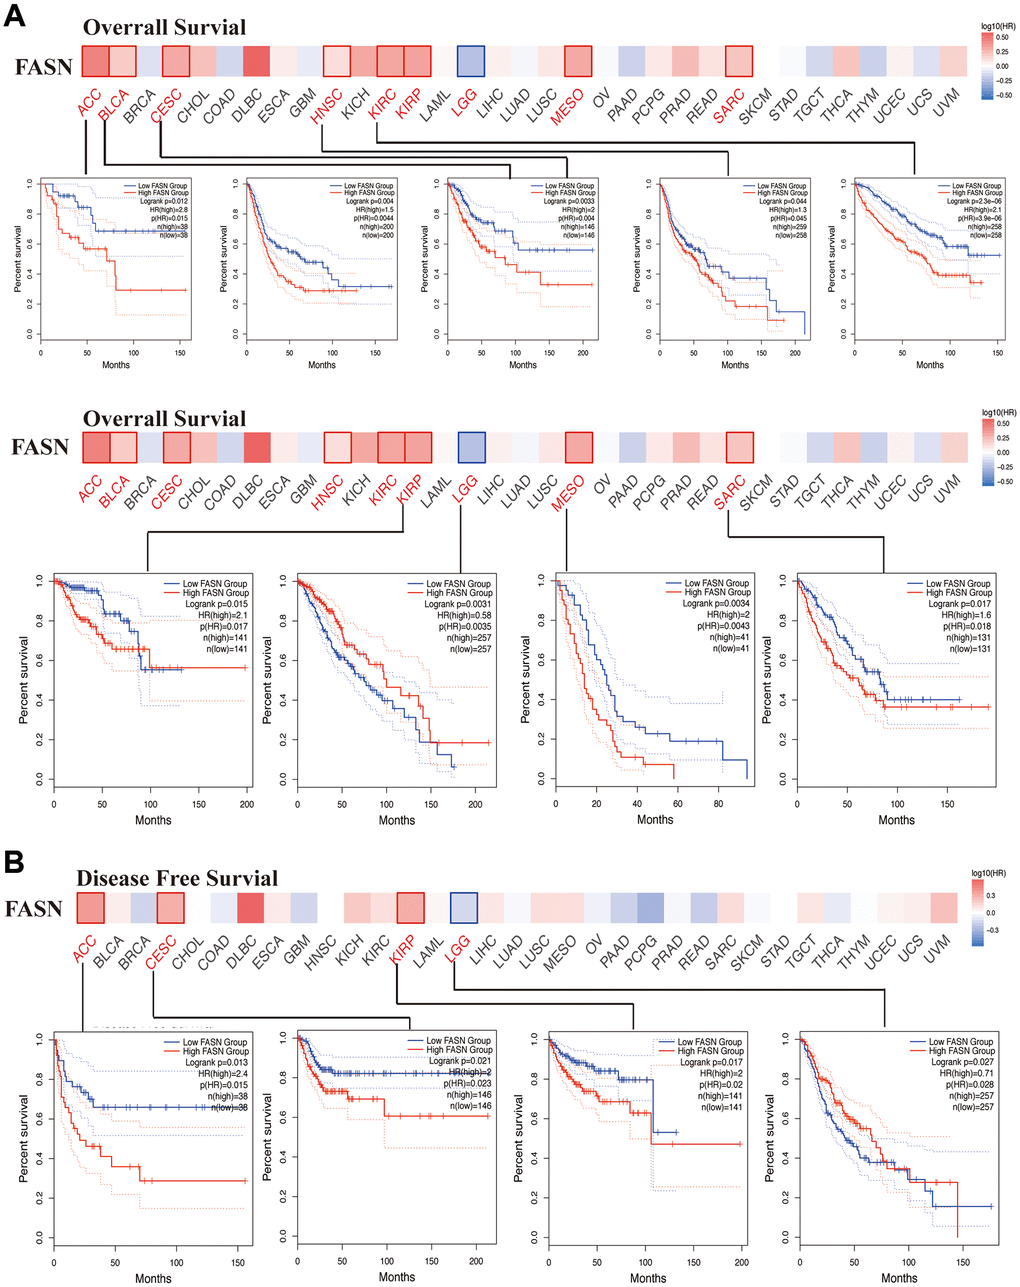 Correlation between FASN gene and the survival outcome of tumors. OS (A) and DFS (B) analyses of various tumors. The survival map and Kaplan-Meier curves with positive results are displayed.